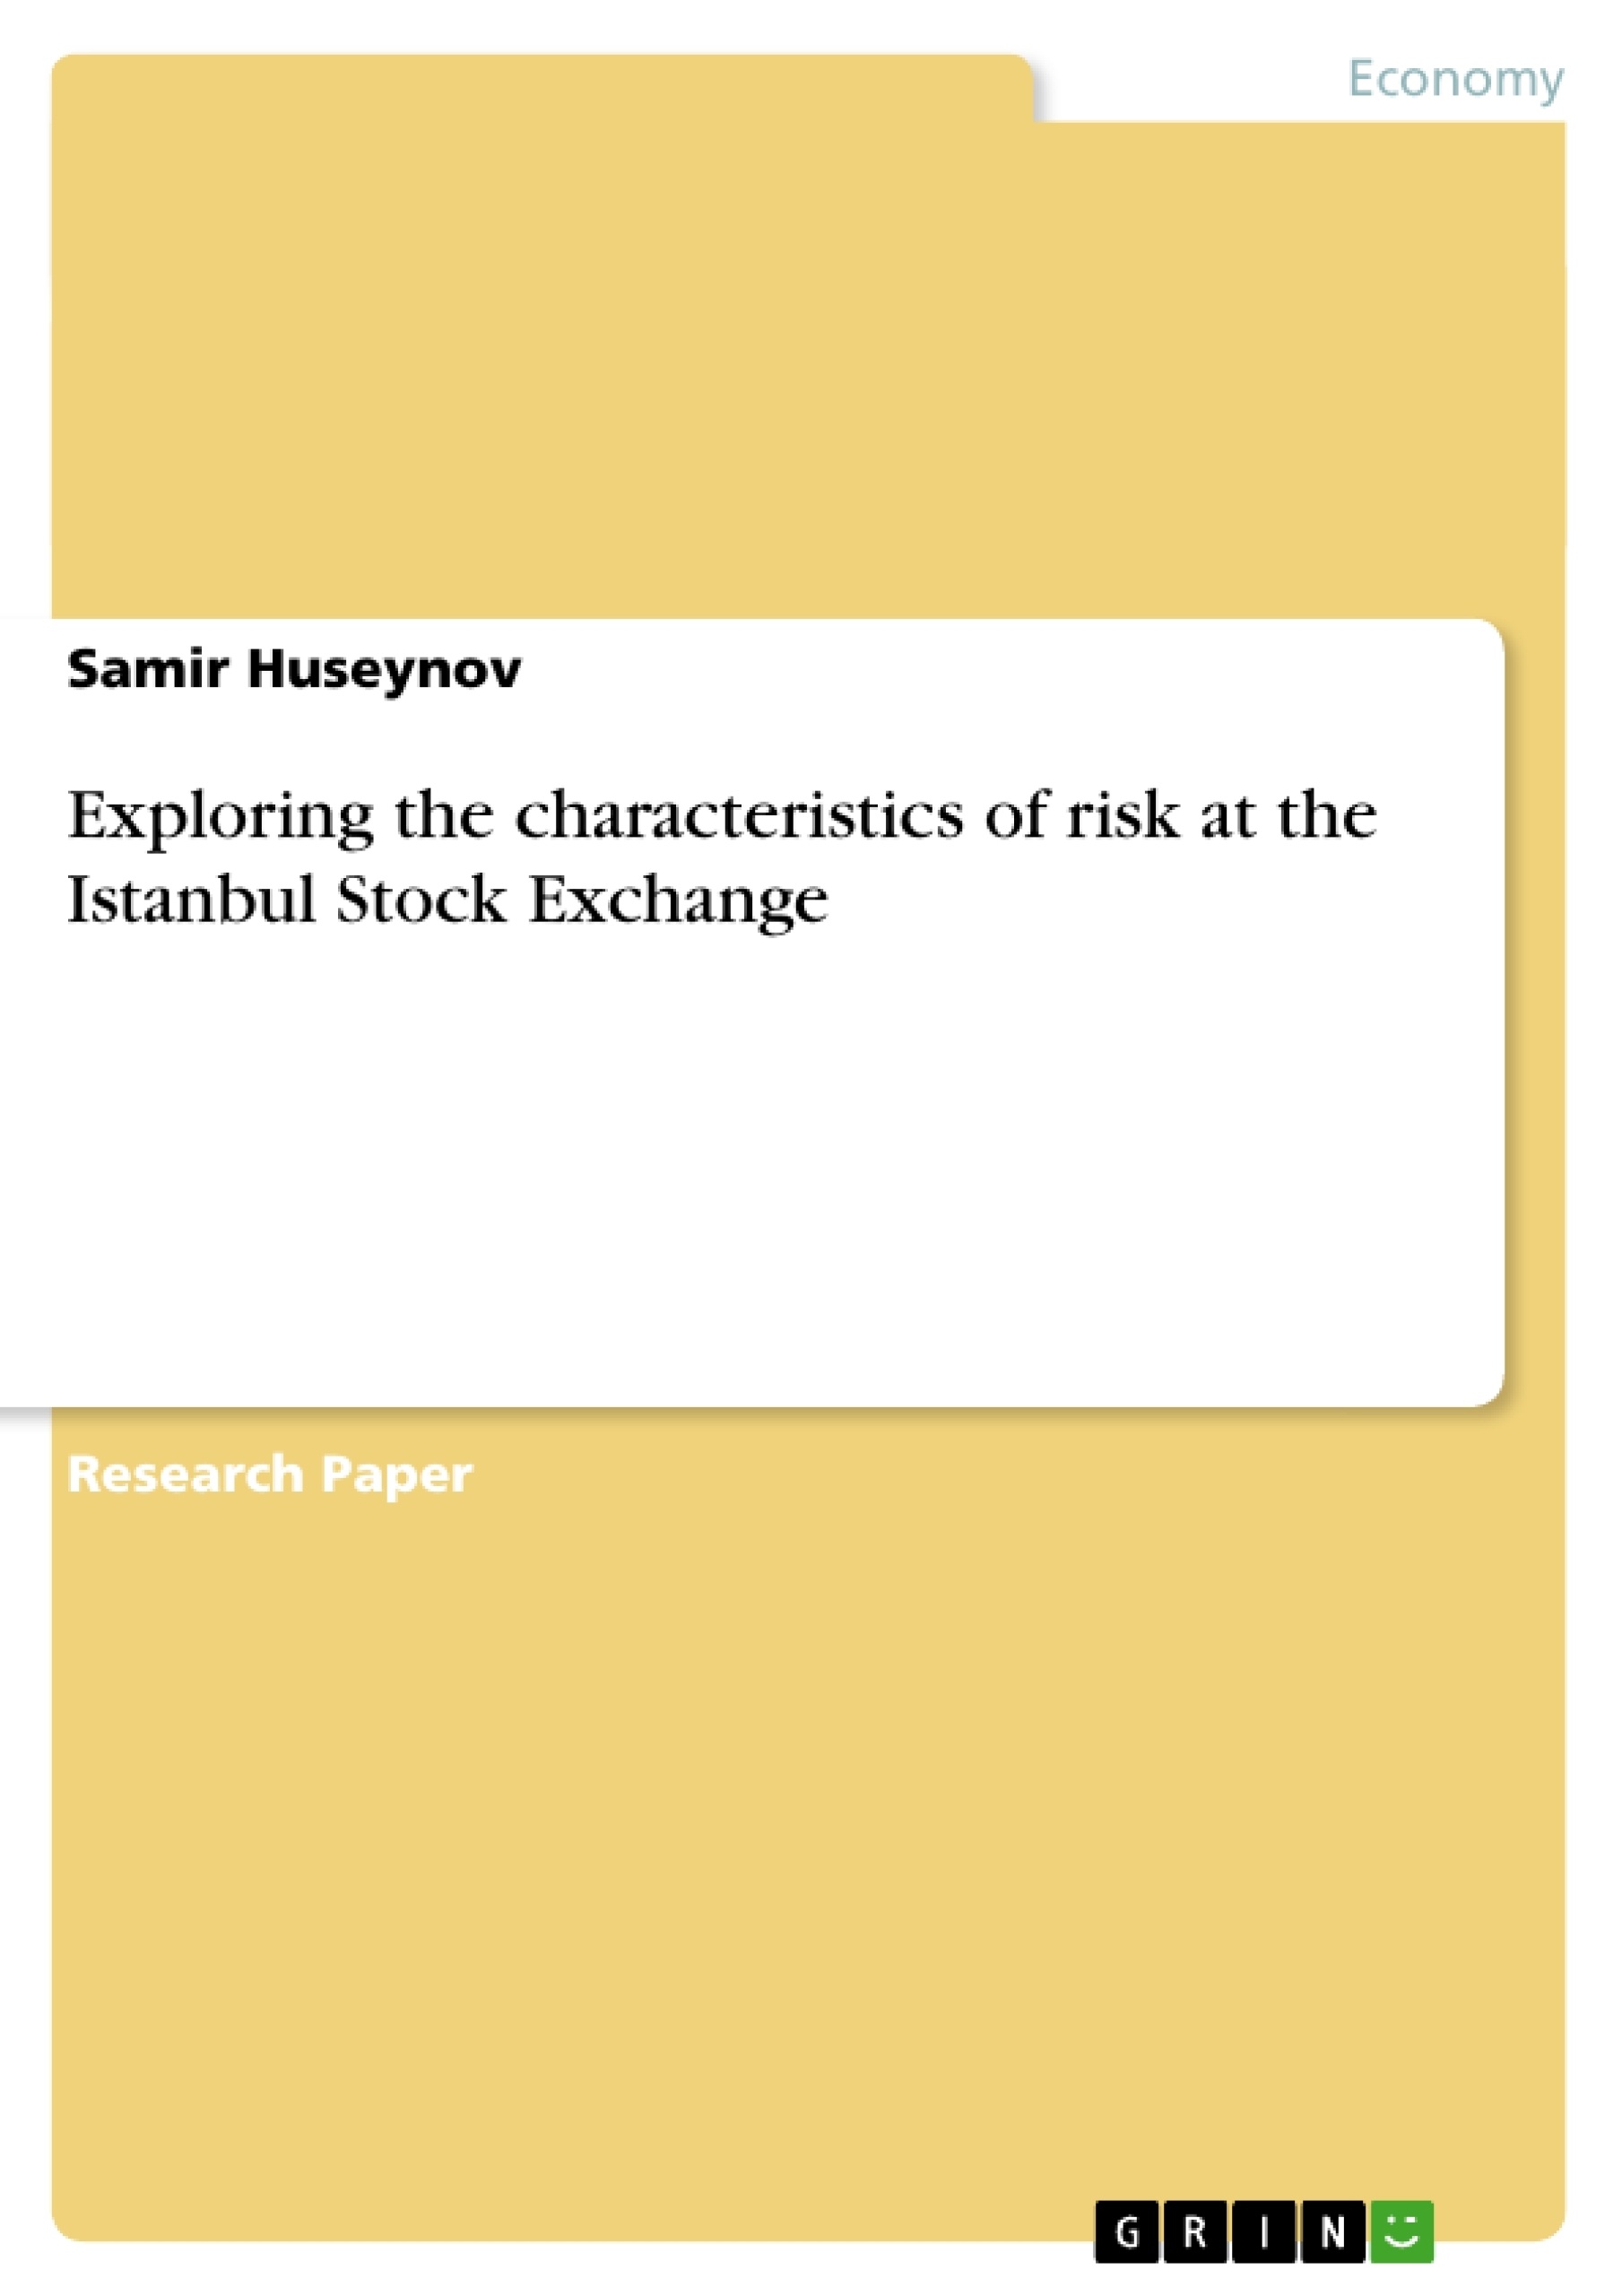 Title: Exploring the characteristics of risk at the Istanbul Stock Exchange